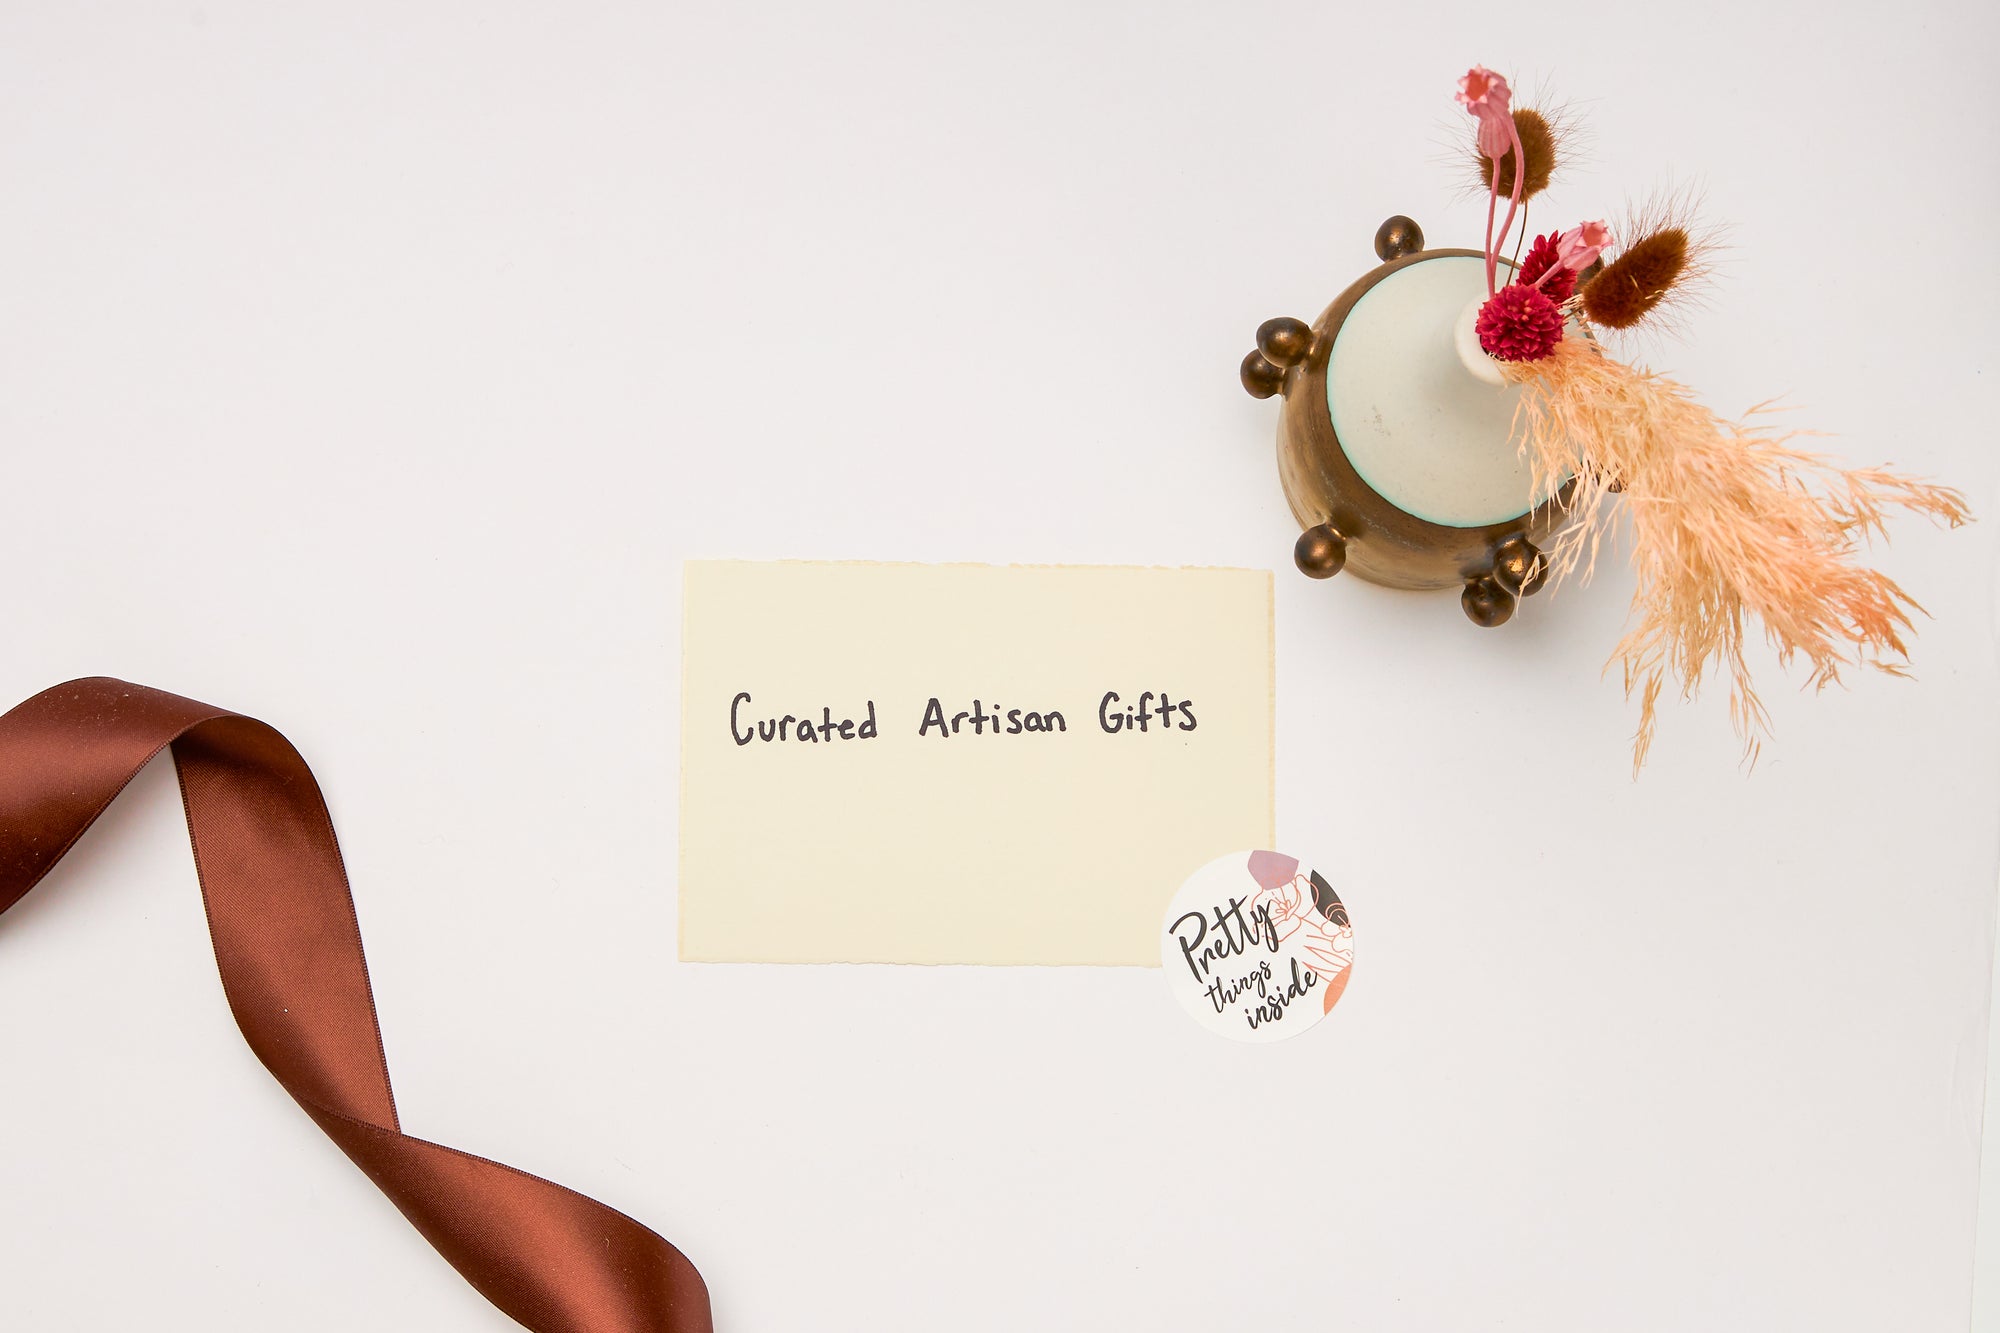 simply very nice curated artisan gifts